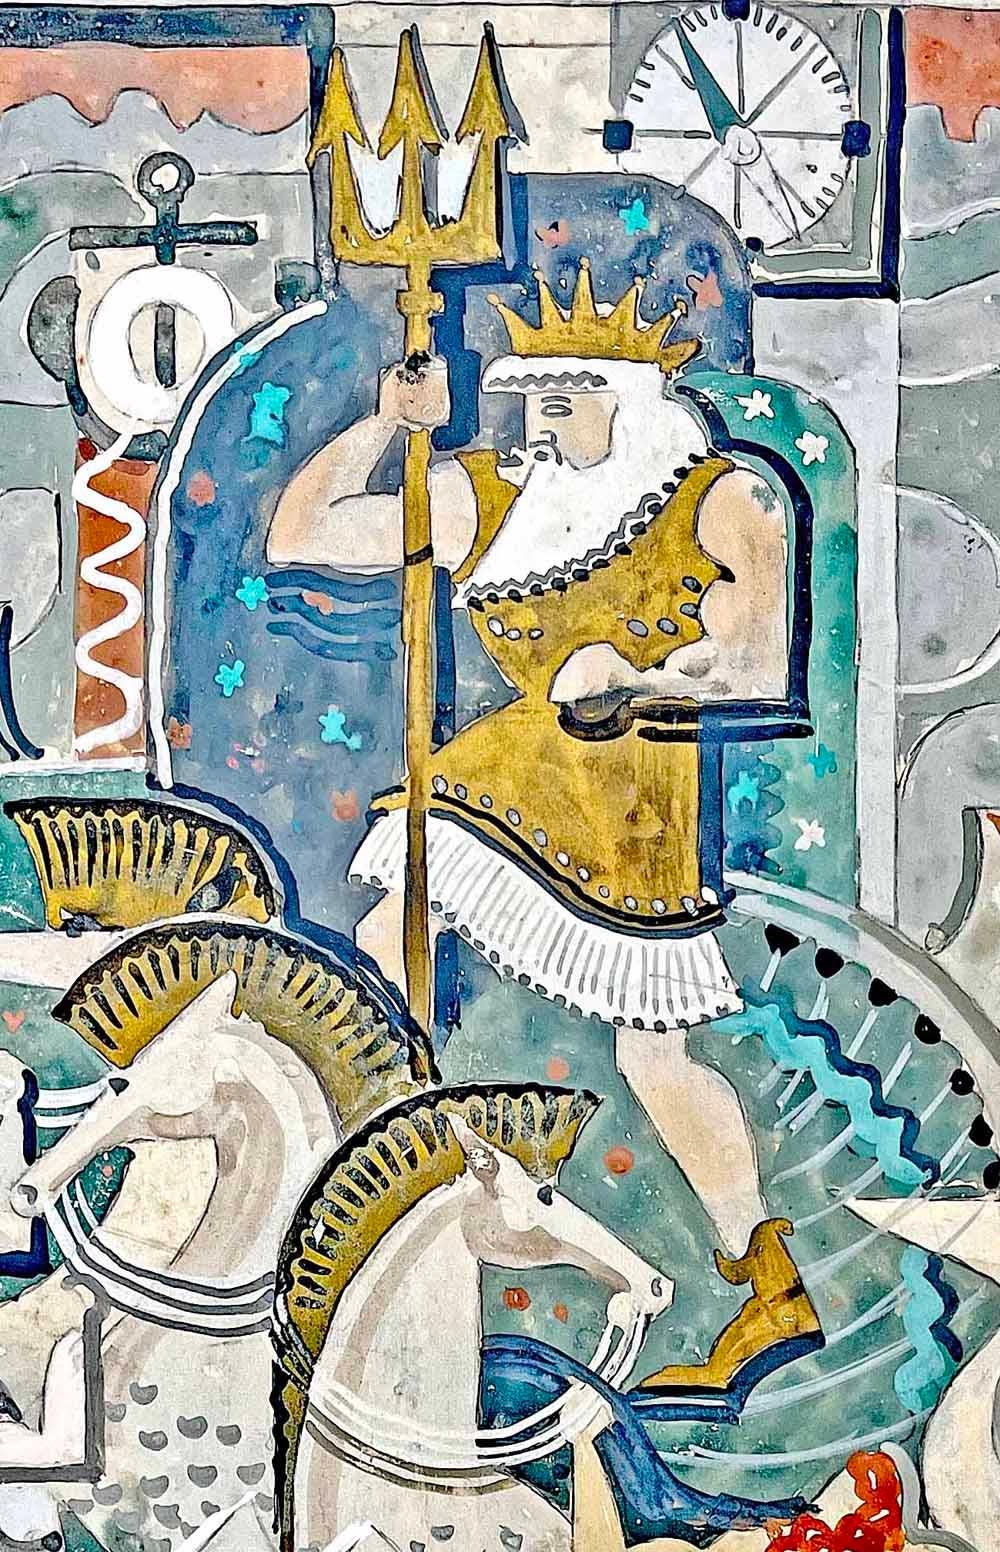 High style and highly-stylized, this Art Deco painting by Bruno Seuchter presents an aquatic scene teeming with life, centered around Neptune with his trident held high. Surrounding him are a coterie of mermaids, hippocampi, tritons and -- in the